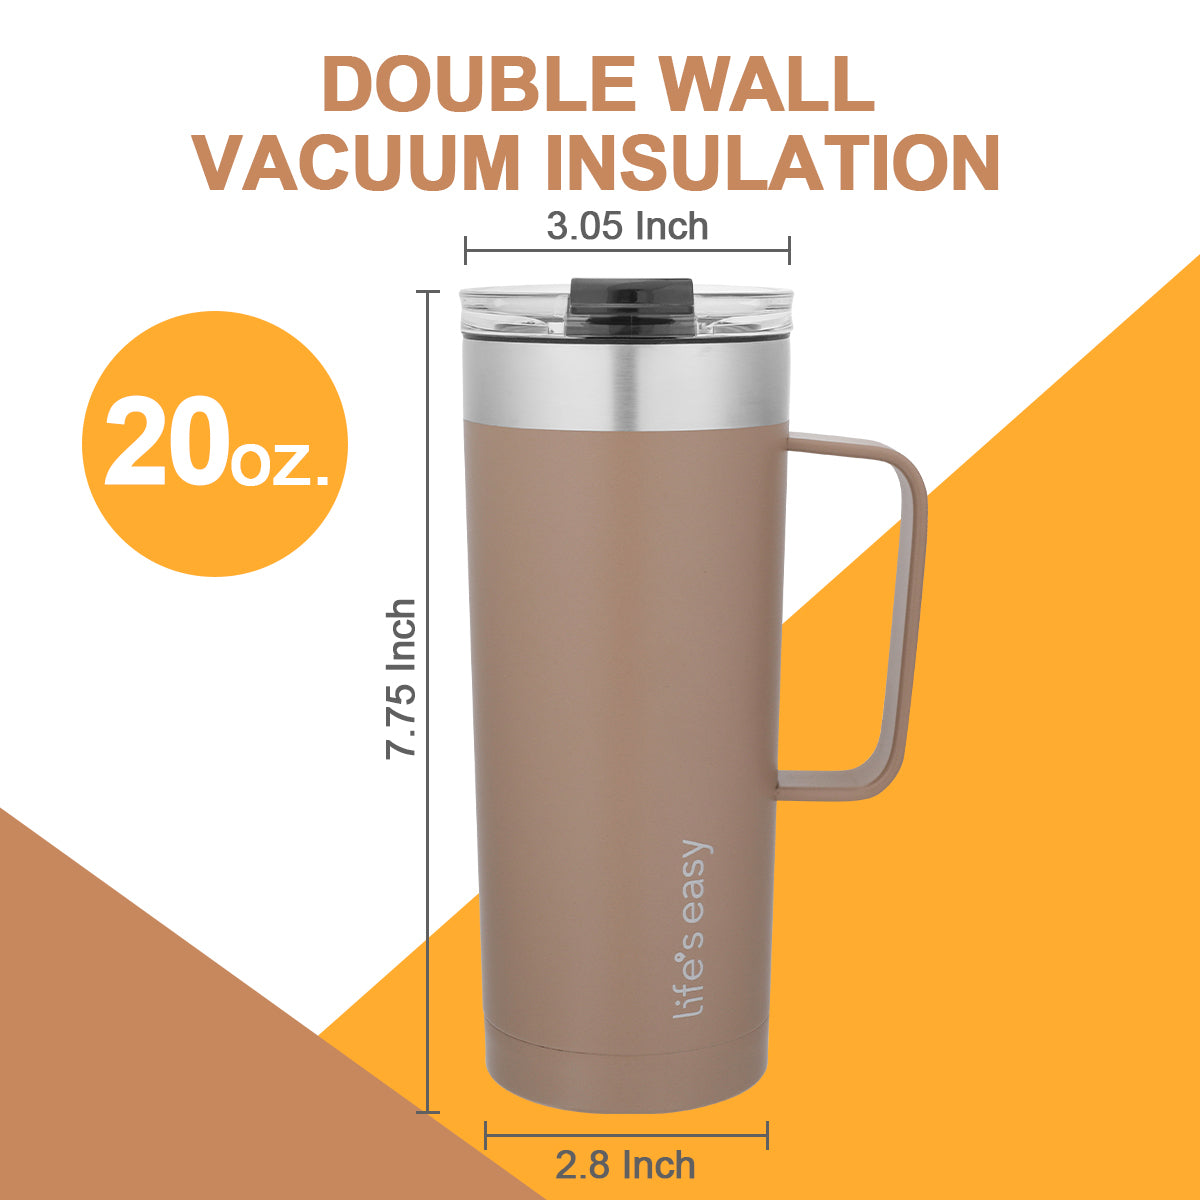 Stainless Steel Mugs & Insulated Cups